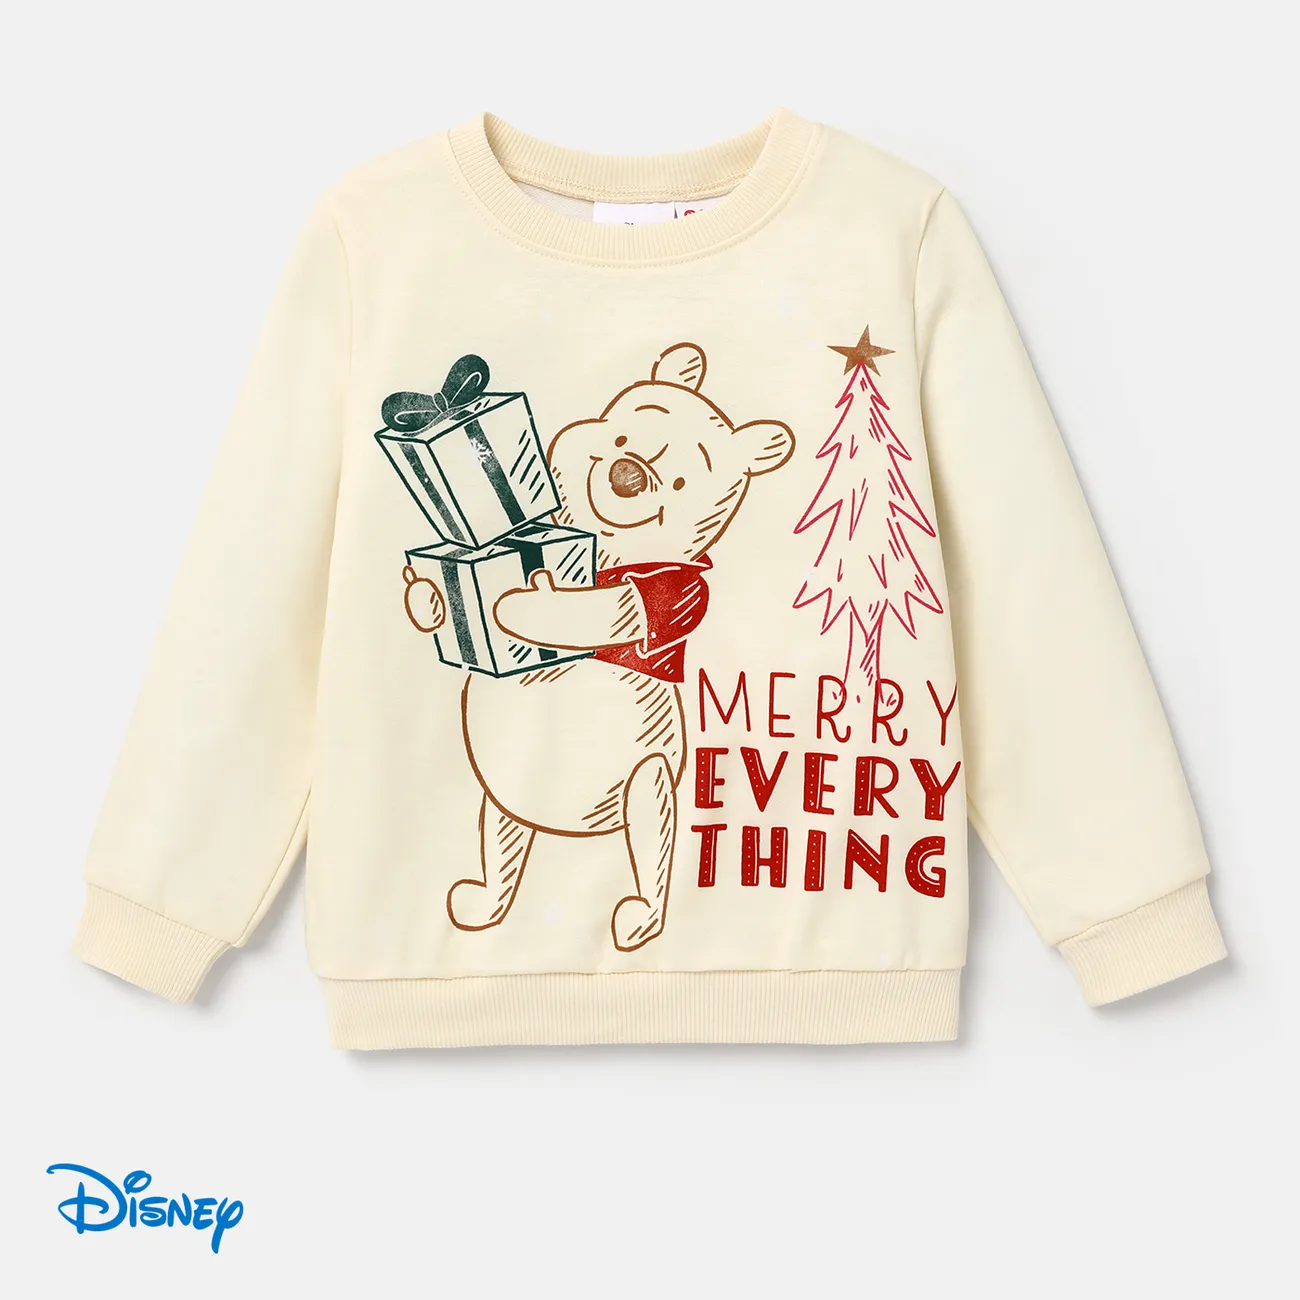 Disney Winnie the Pooh Toddler Girl/Boy Christmas Pullover Top  big image 1